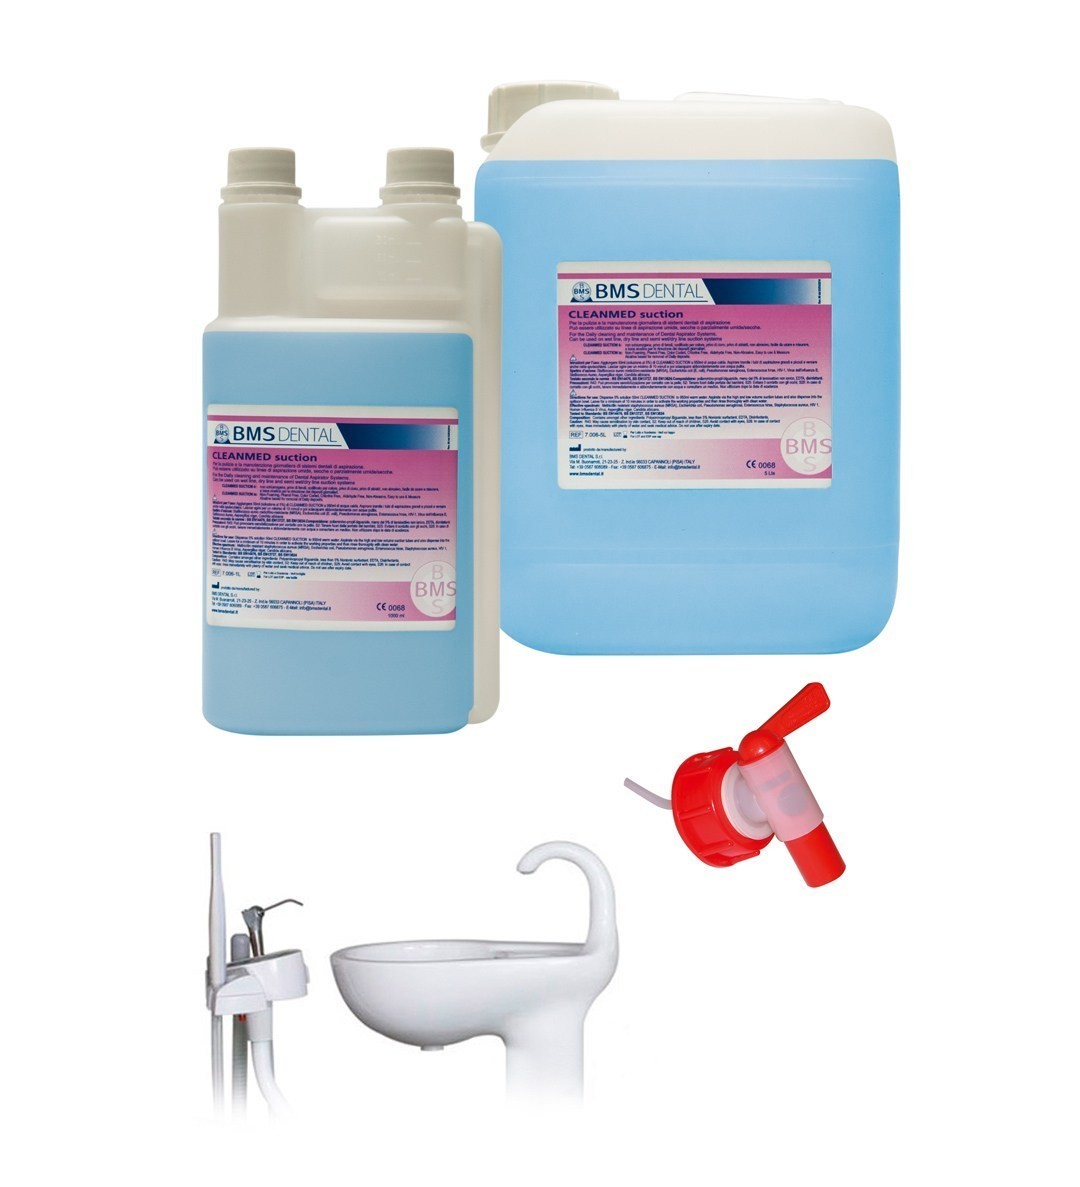 Cleanmed Suction 5L